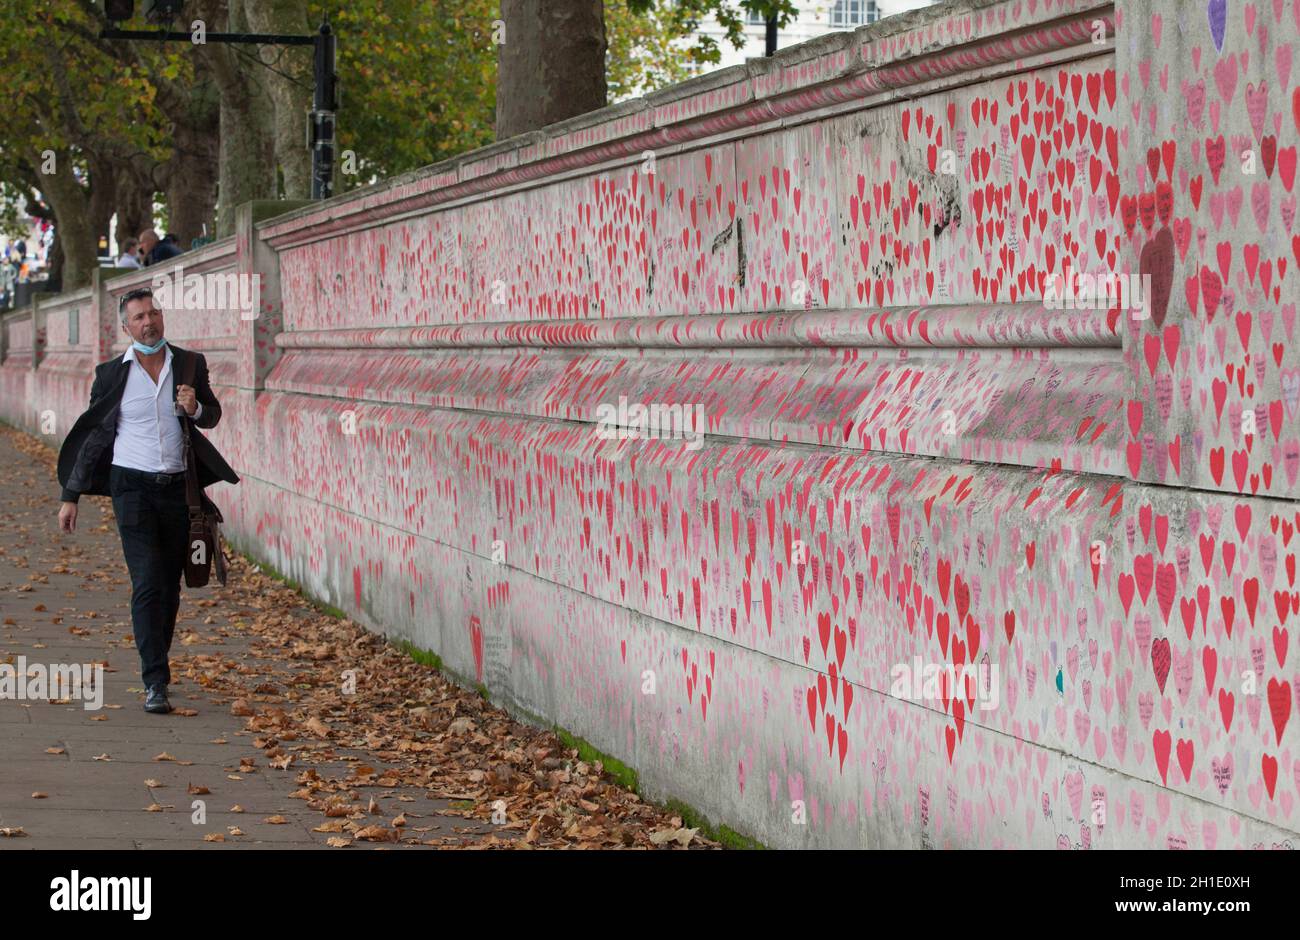 London, UK, 18 October 2021: The National Covid Memorial Wall on the south bank of the Thames, with each heart representing one person who has died during the coronavirus pandemic. So far the total number of people in the UK who have died with Covid-19 on their death certificates is 161,798. The wall is boundary of St Thomas's Hospital and faces the Houses of Parliament, with the hearts stretching for hundreds of metres besides the River Thames. It was created by volunteers organised by the campaign group Covid-19 Bereaved Families for Justice with the help of Led By Donkeys. The original red Stock Photo